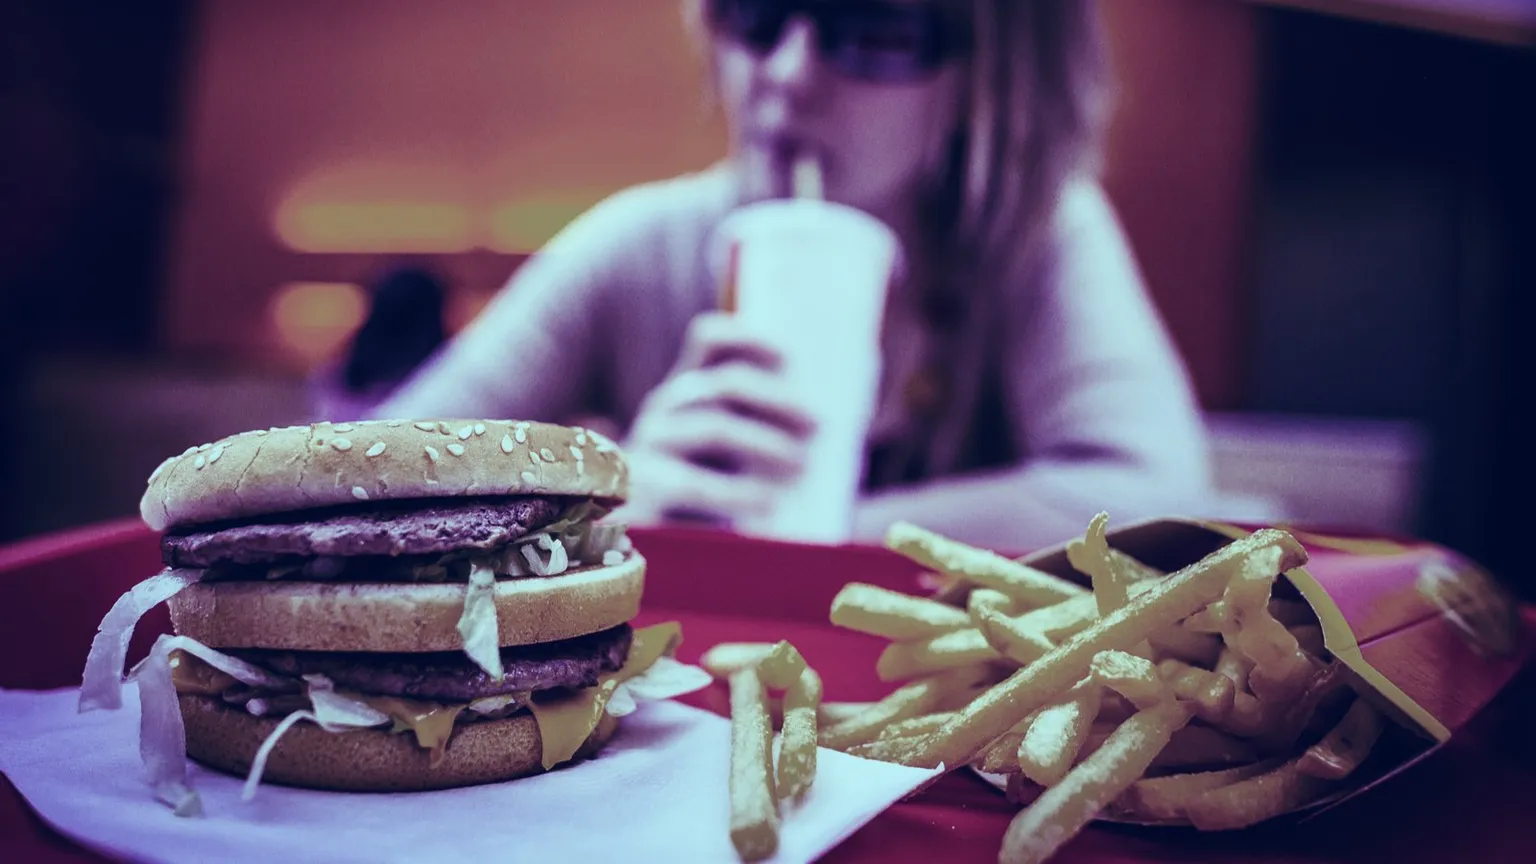 The Big Mac requires no explanation. Image: Shutterstock